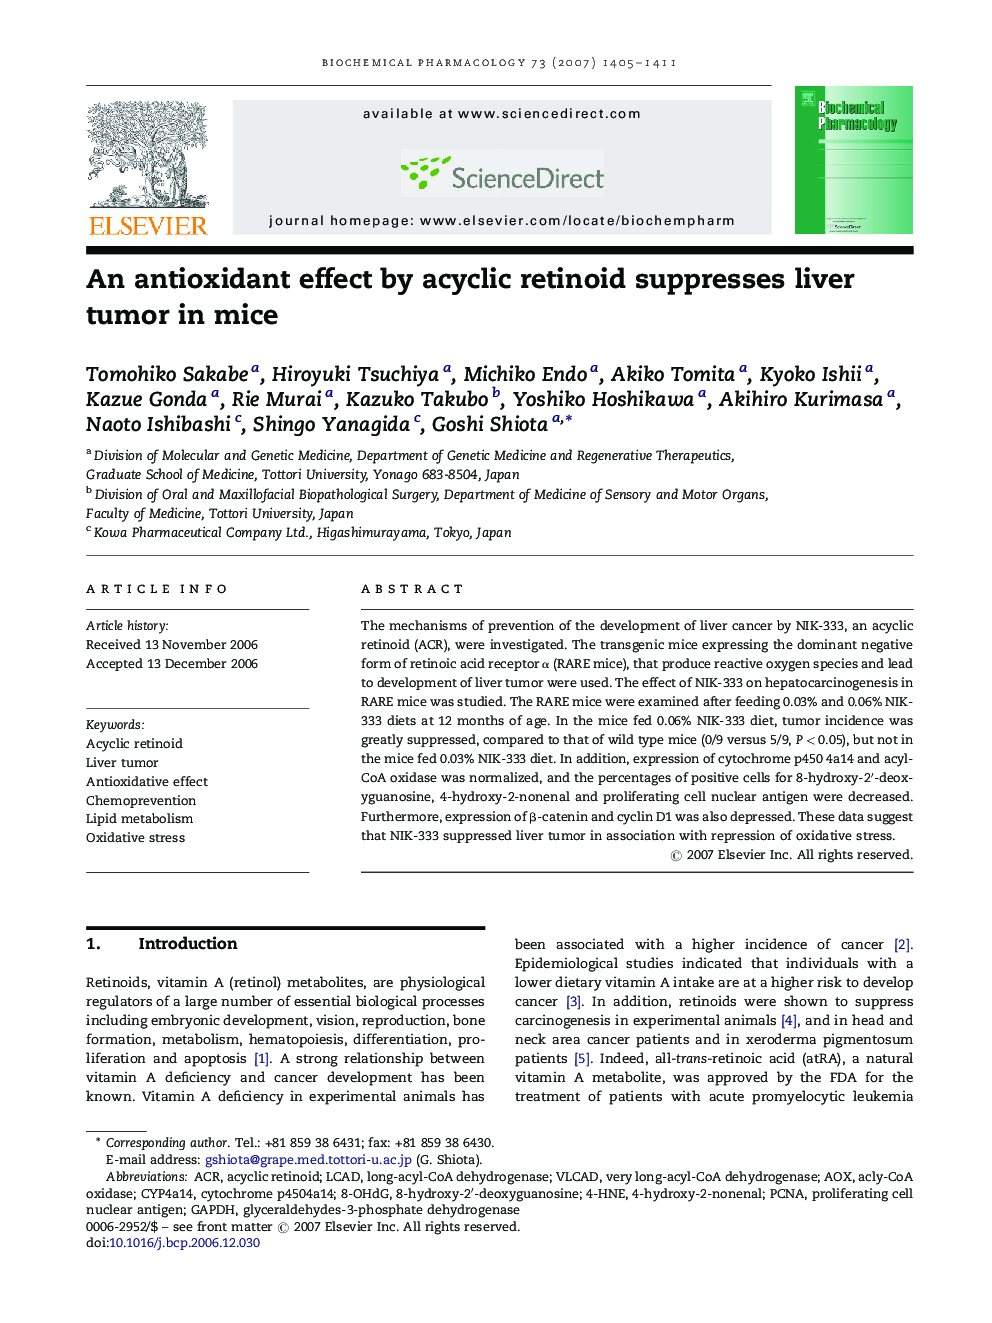 An antioxidant effect by acyclic retinoid suppresses liver tumor in mice